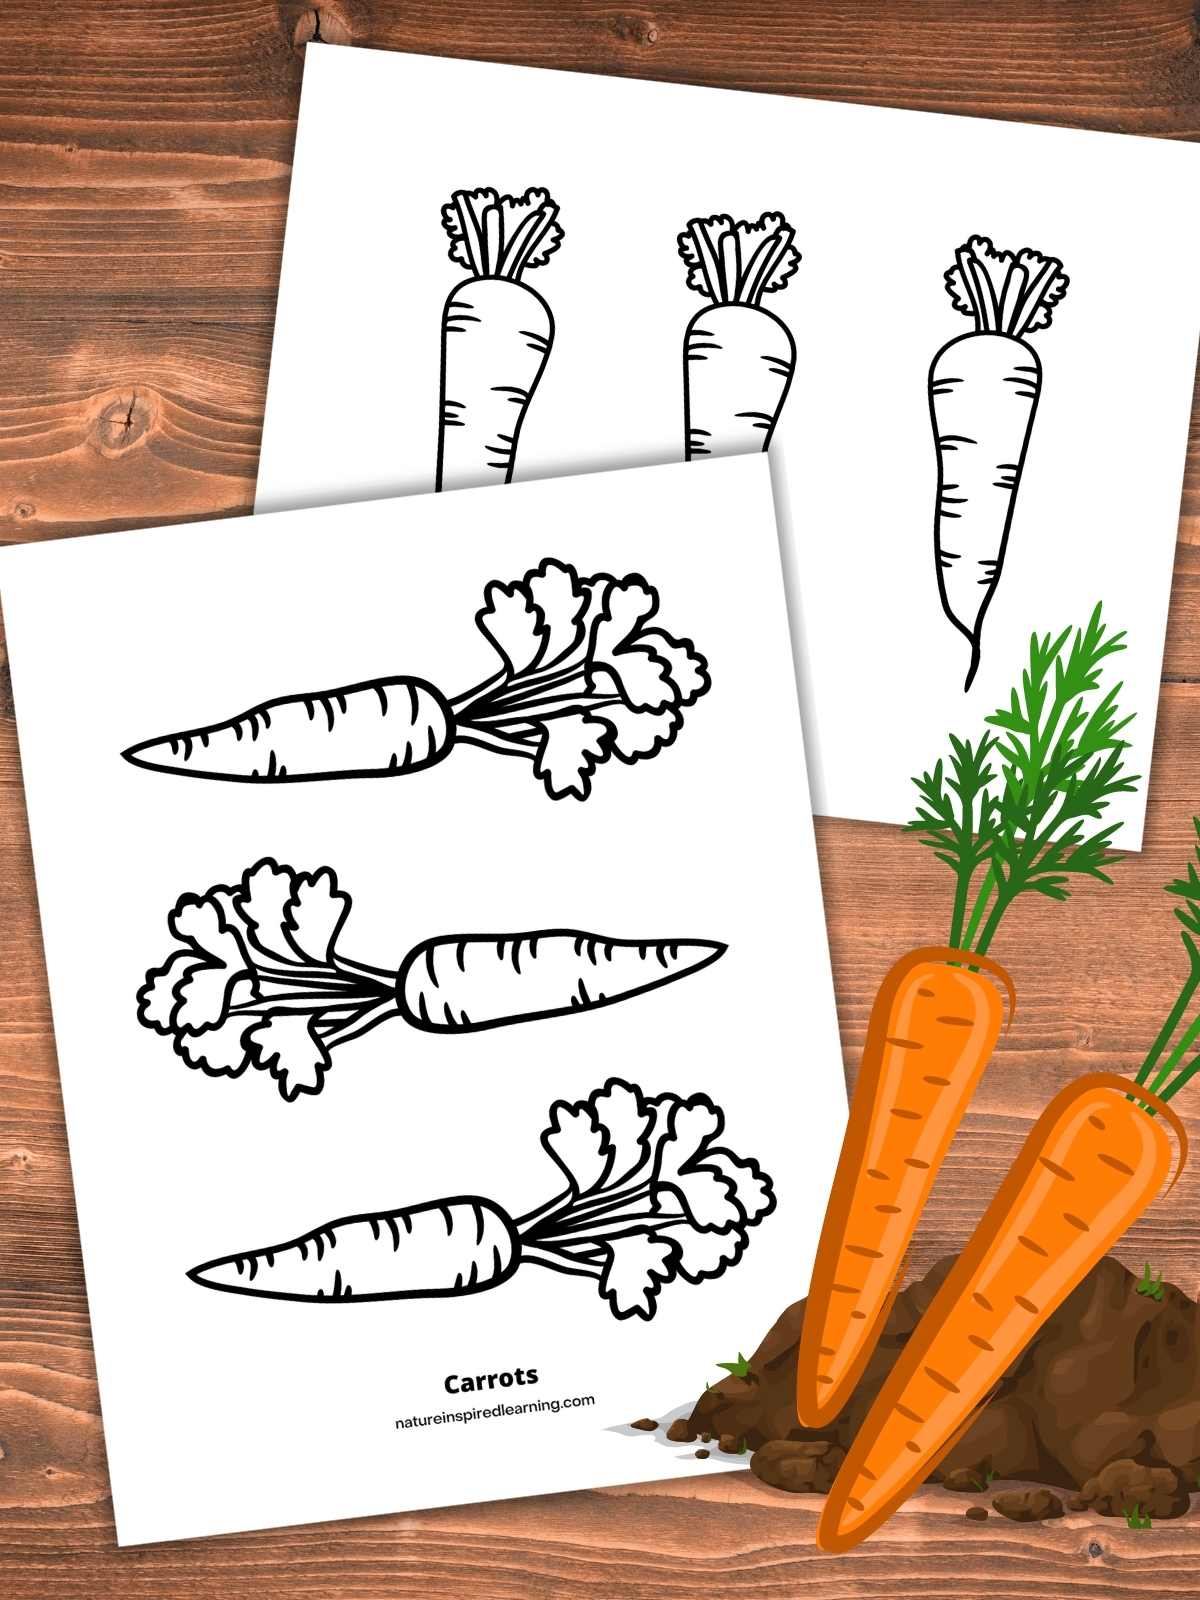 Carrot Drawing Images | Free Photos, PNG Stickers, Wallpapers & Backgrounds  - rawpixel